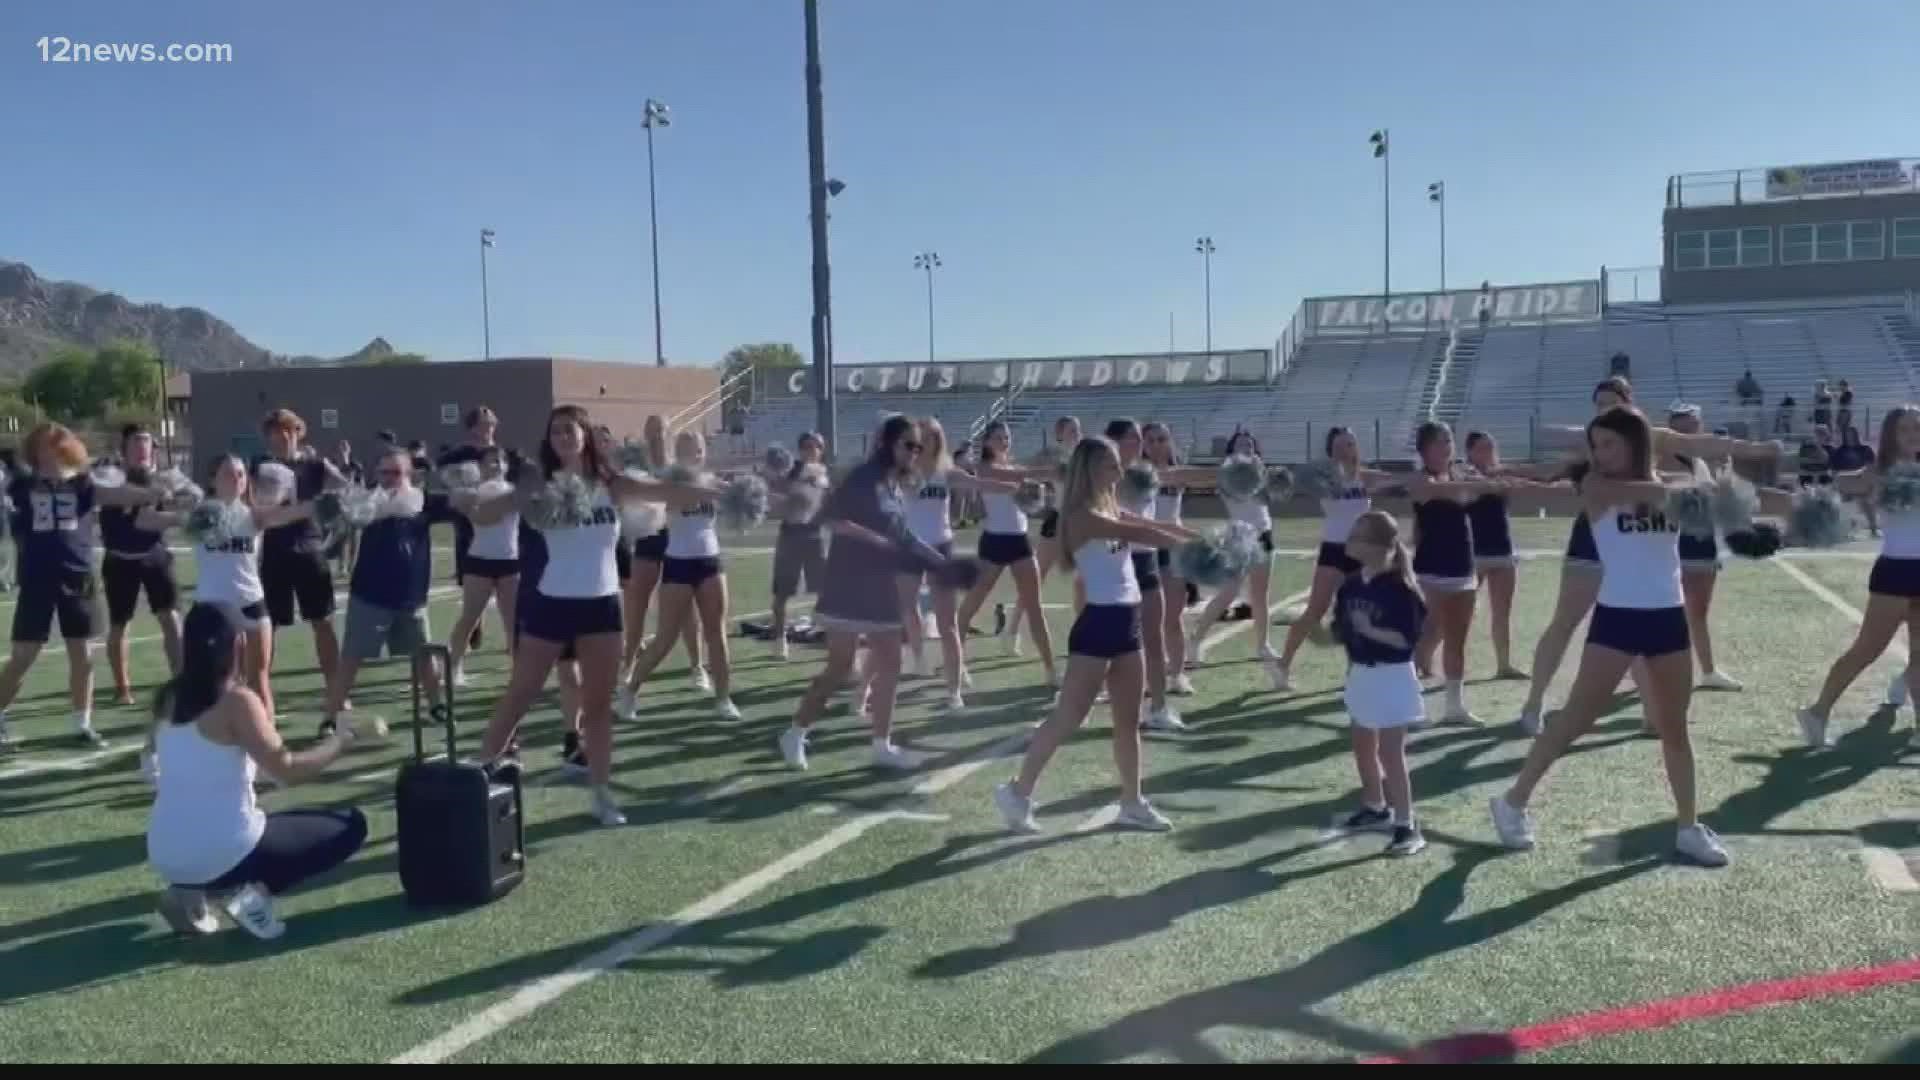 Students with various disabilities participated in the "One Team" Day at Cactus Shadows High School. Rachel Cole has the details.